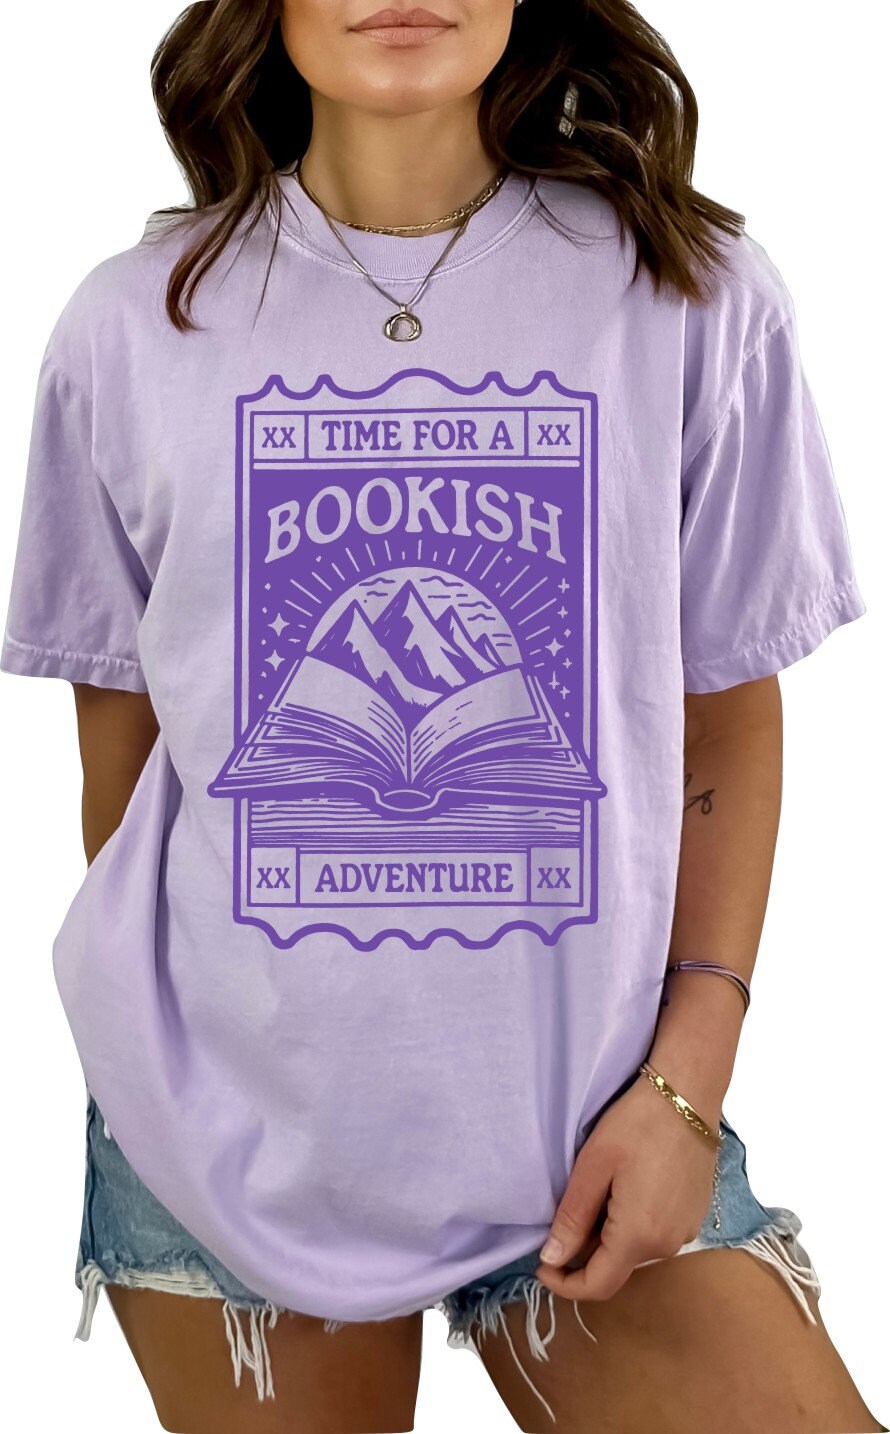 Book shirt Book Lover TShirt women Reading Shirts Book Club book shirt for women reading shirt Book gift Time for a bookish adventure Shirt